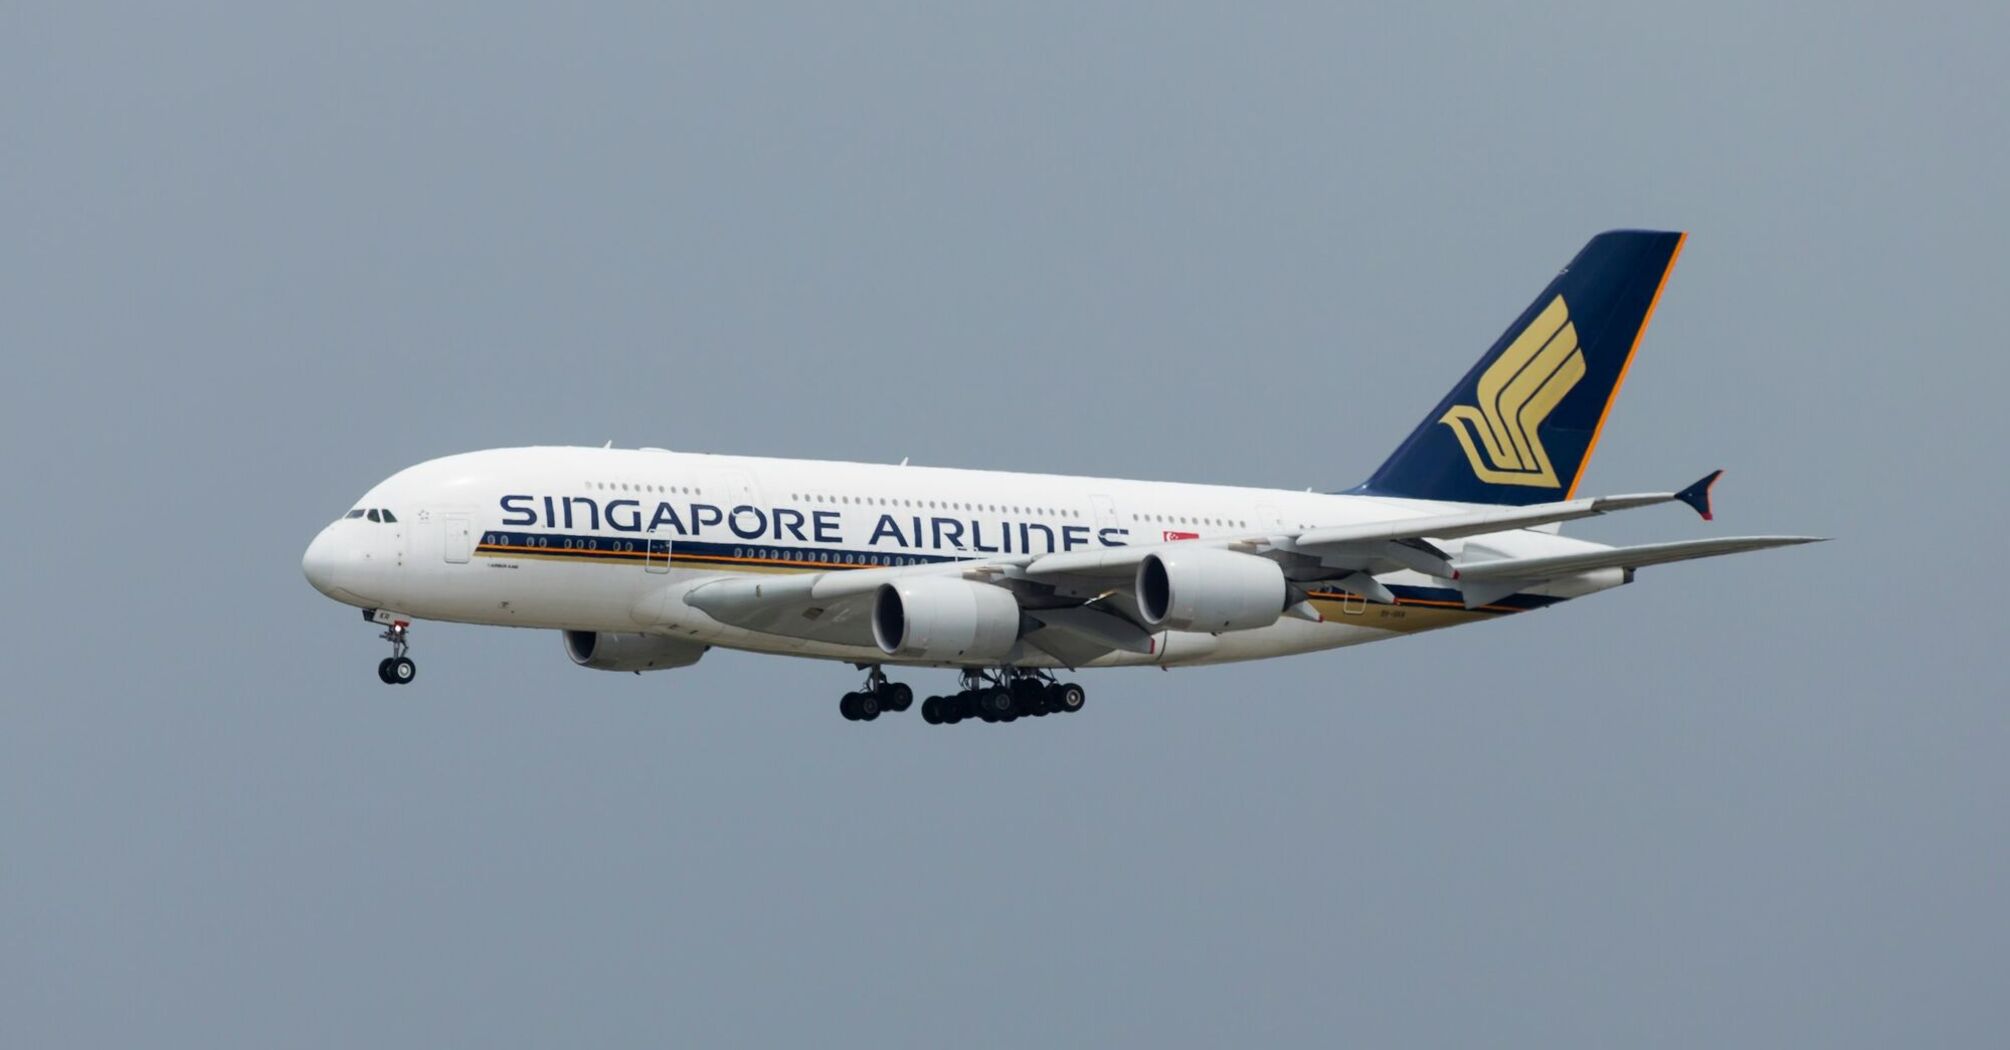 Singapore Airlines aircraft in flight